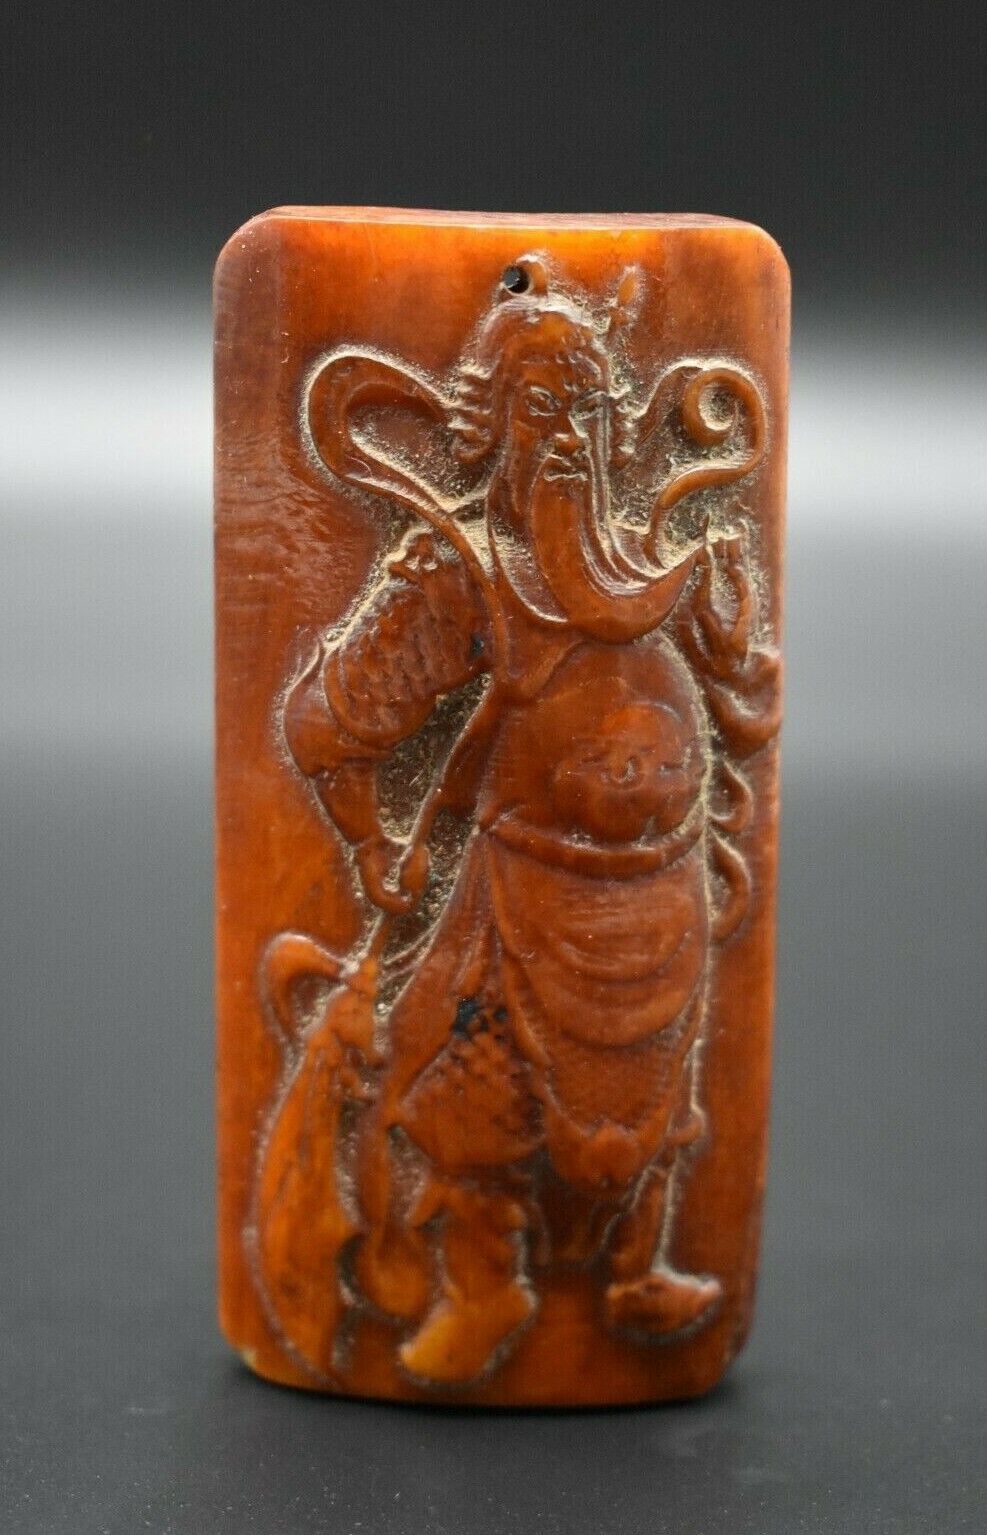 Chinese Qing Dynasty carved decorated pendant C. 19th century AD